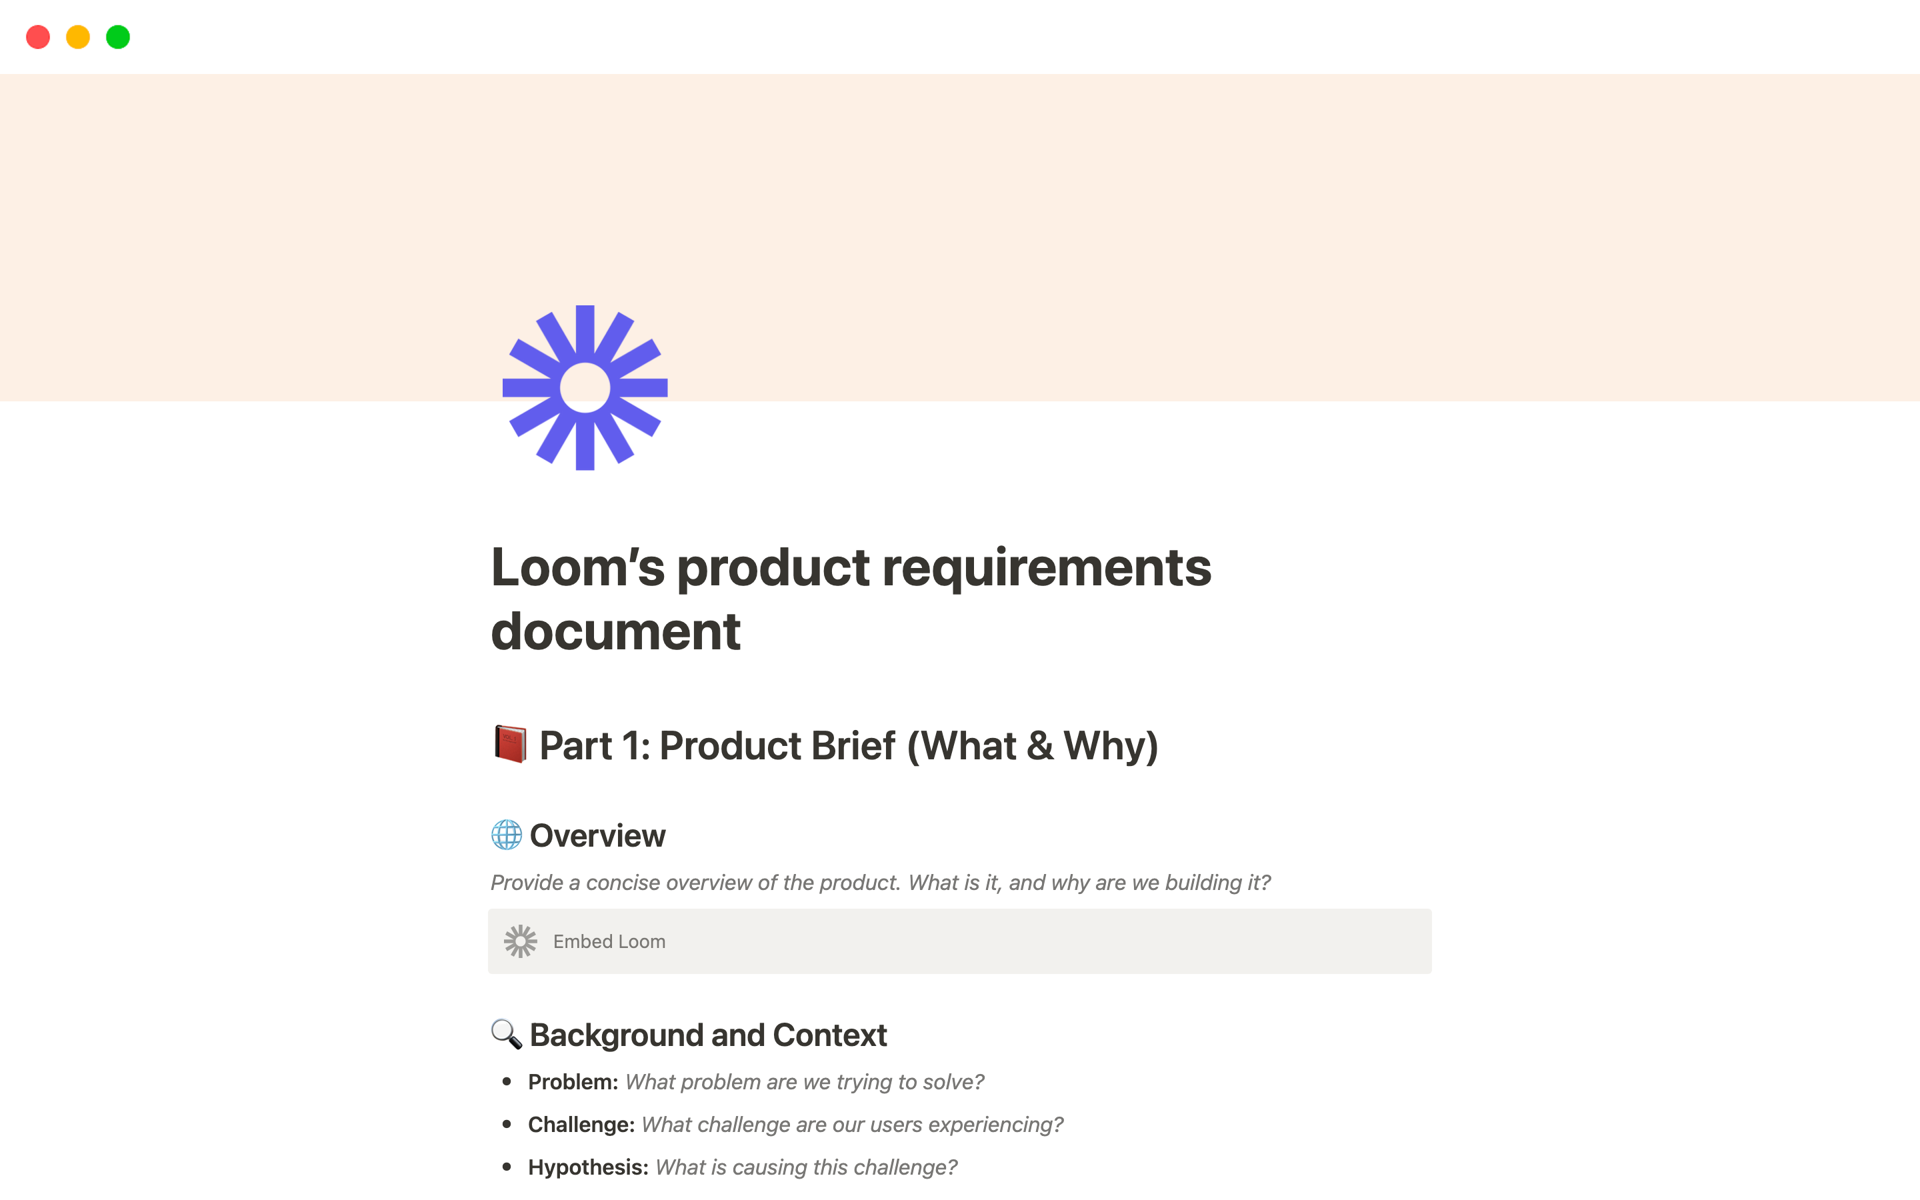 Notion님의 Best 10 PRD: Product Requirements Doc Templates for Product Designers 컬렉션 스크린샷